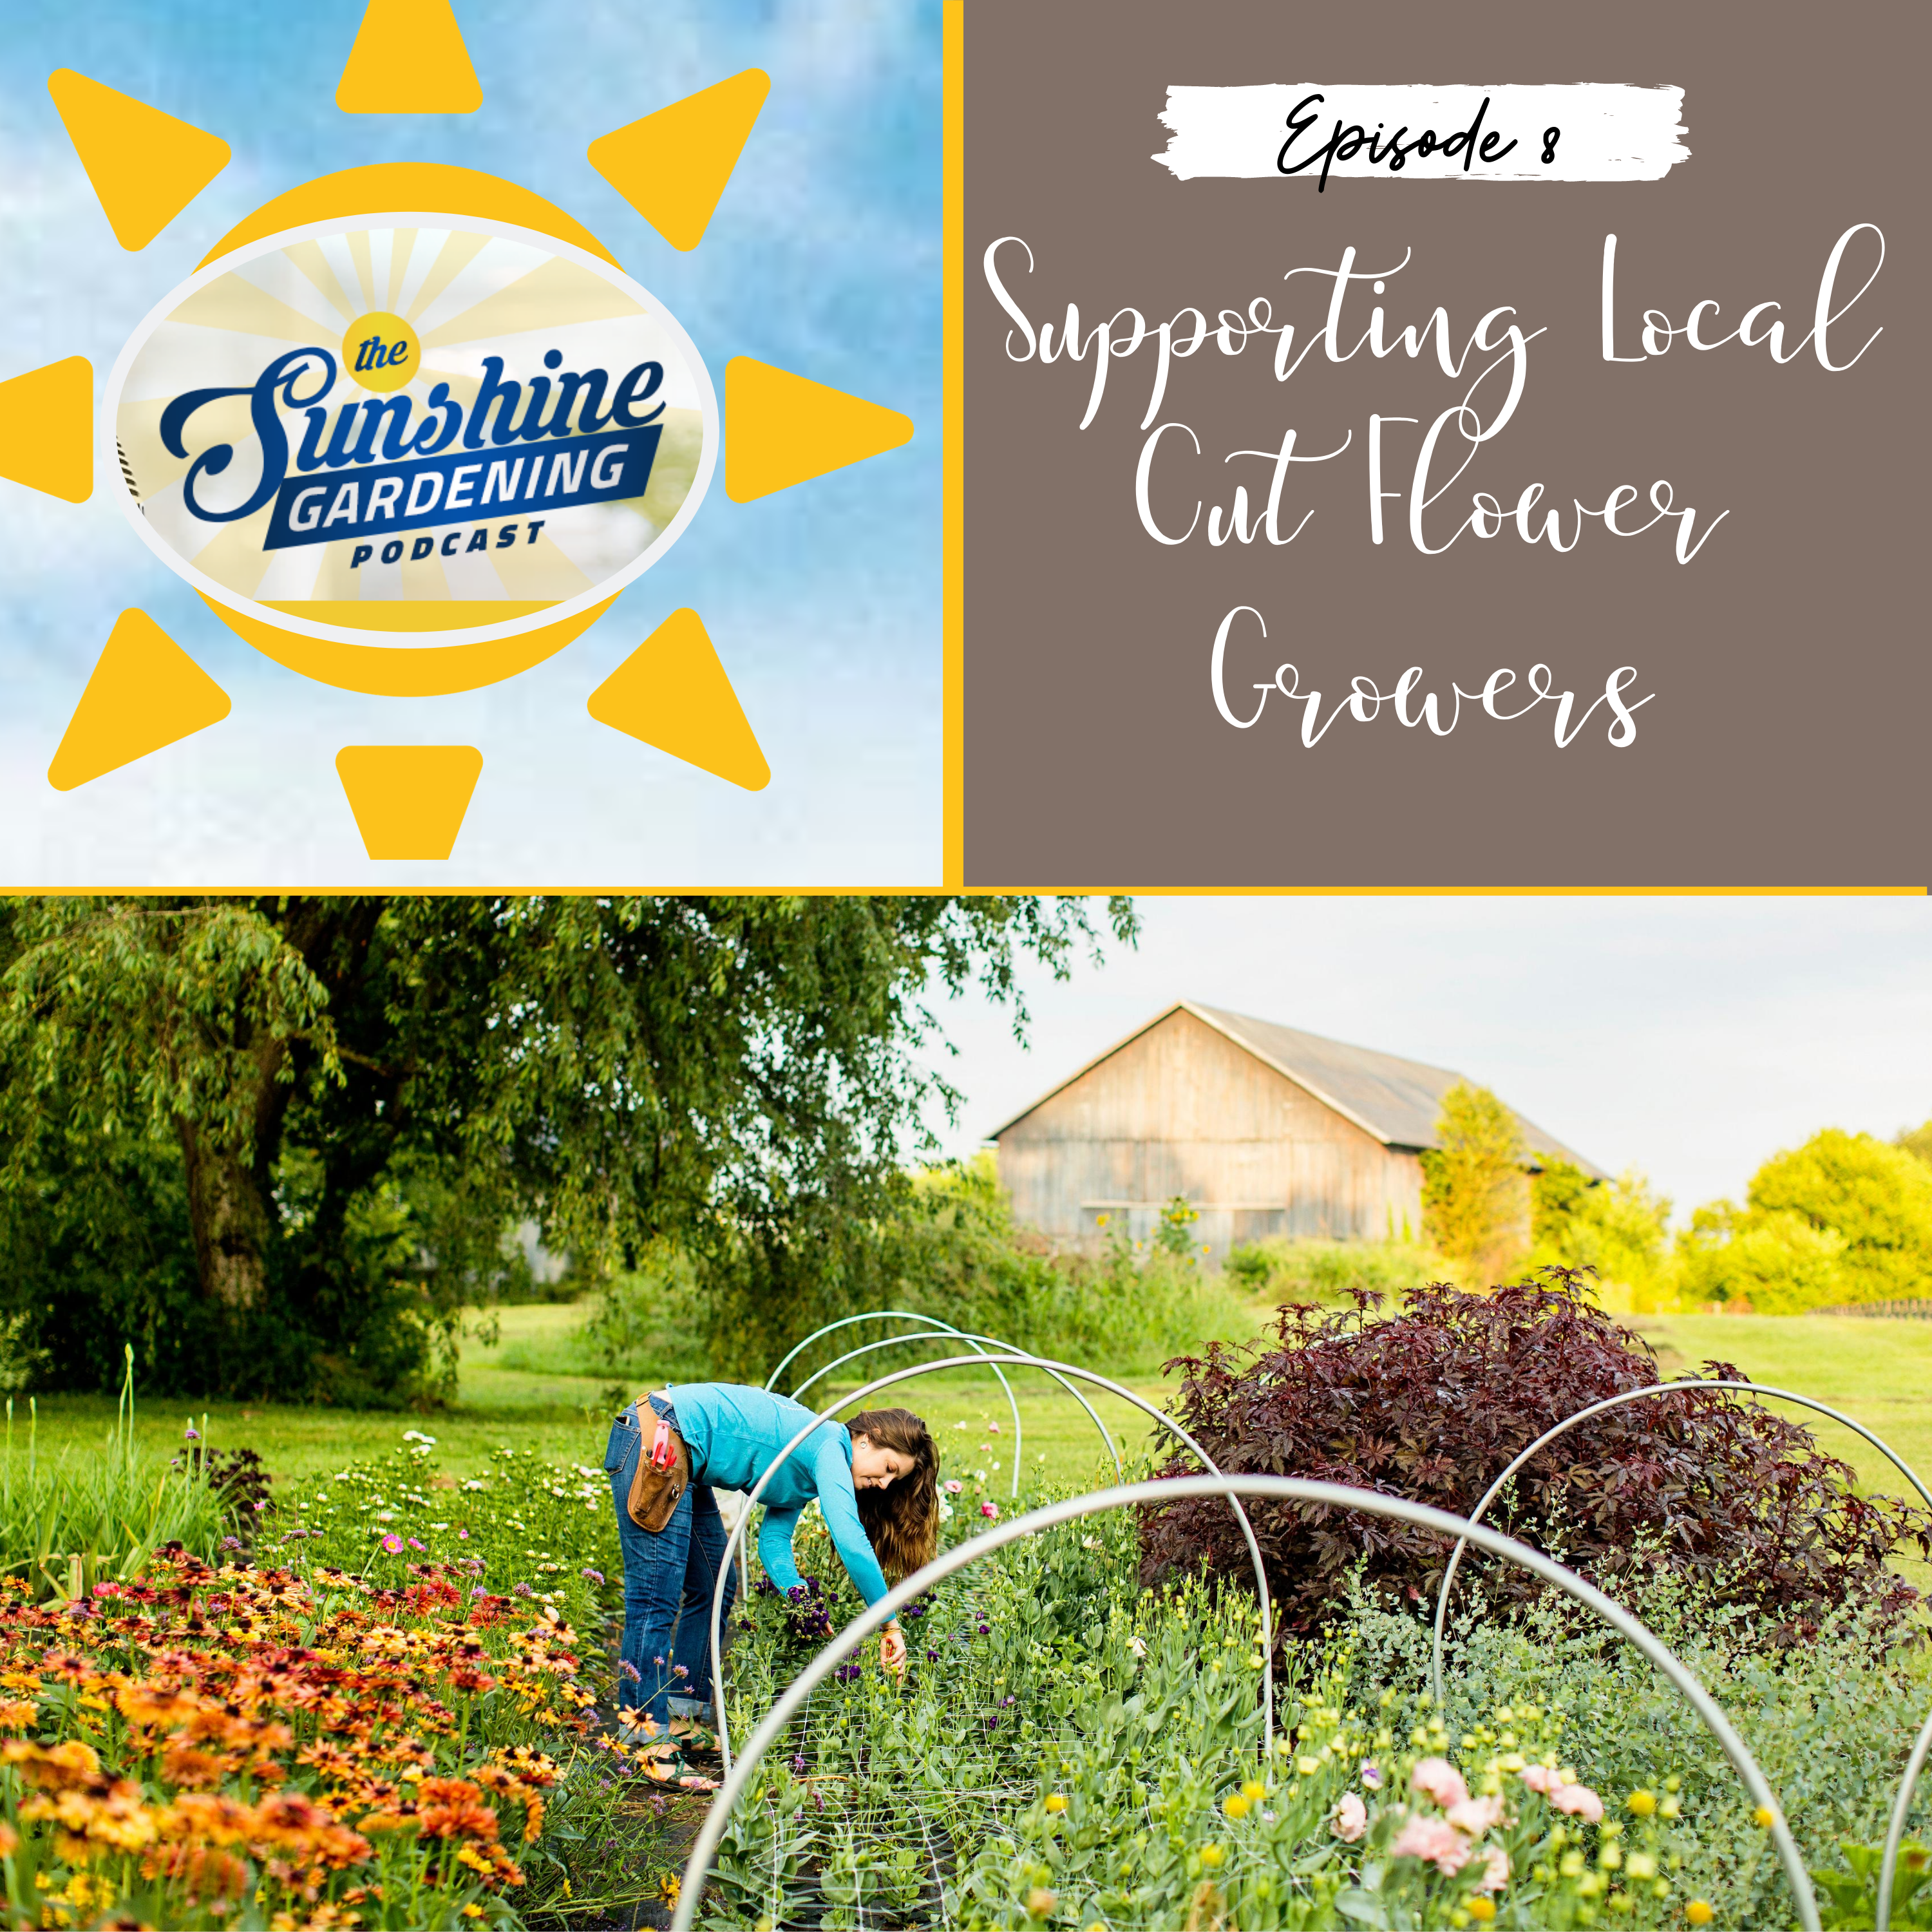 Episode 8- Supporting Local Cut Flower Growers